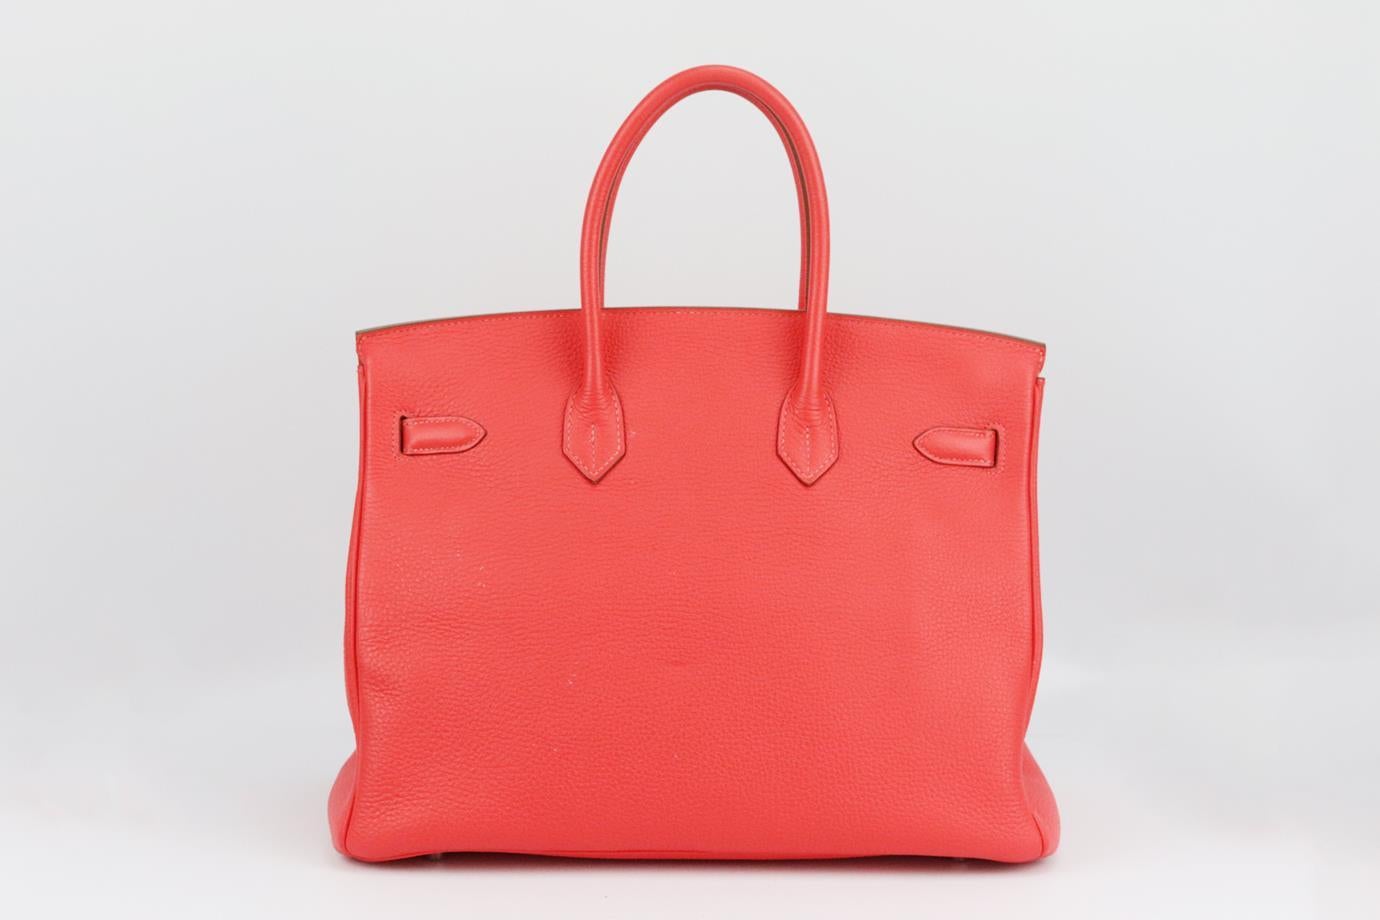 Hermès 2012 Birkin 35cm Togo Leather Bag In Excellent Condition For Sale In London, GB